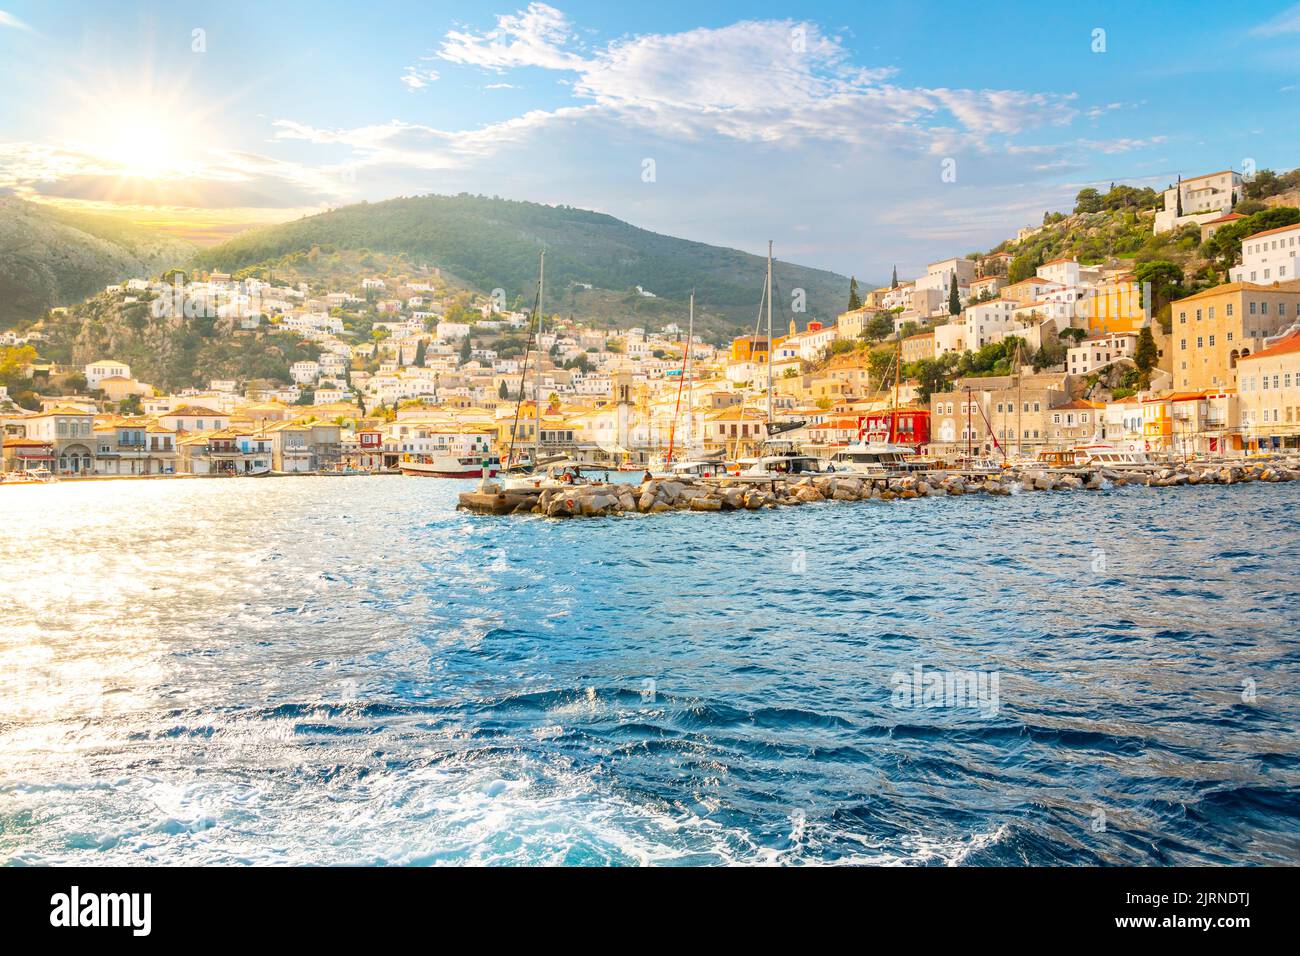 The picturesque and colorful village of Hydra on the Saronic island of Hydra, Greece, as the sun sets in the Aegean Sea. Stock Photo